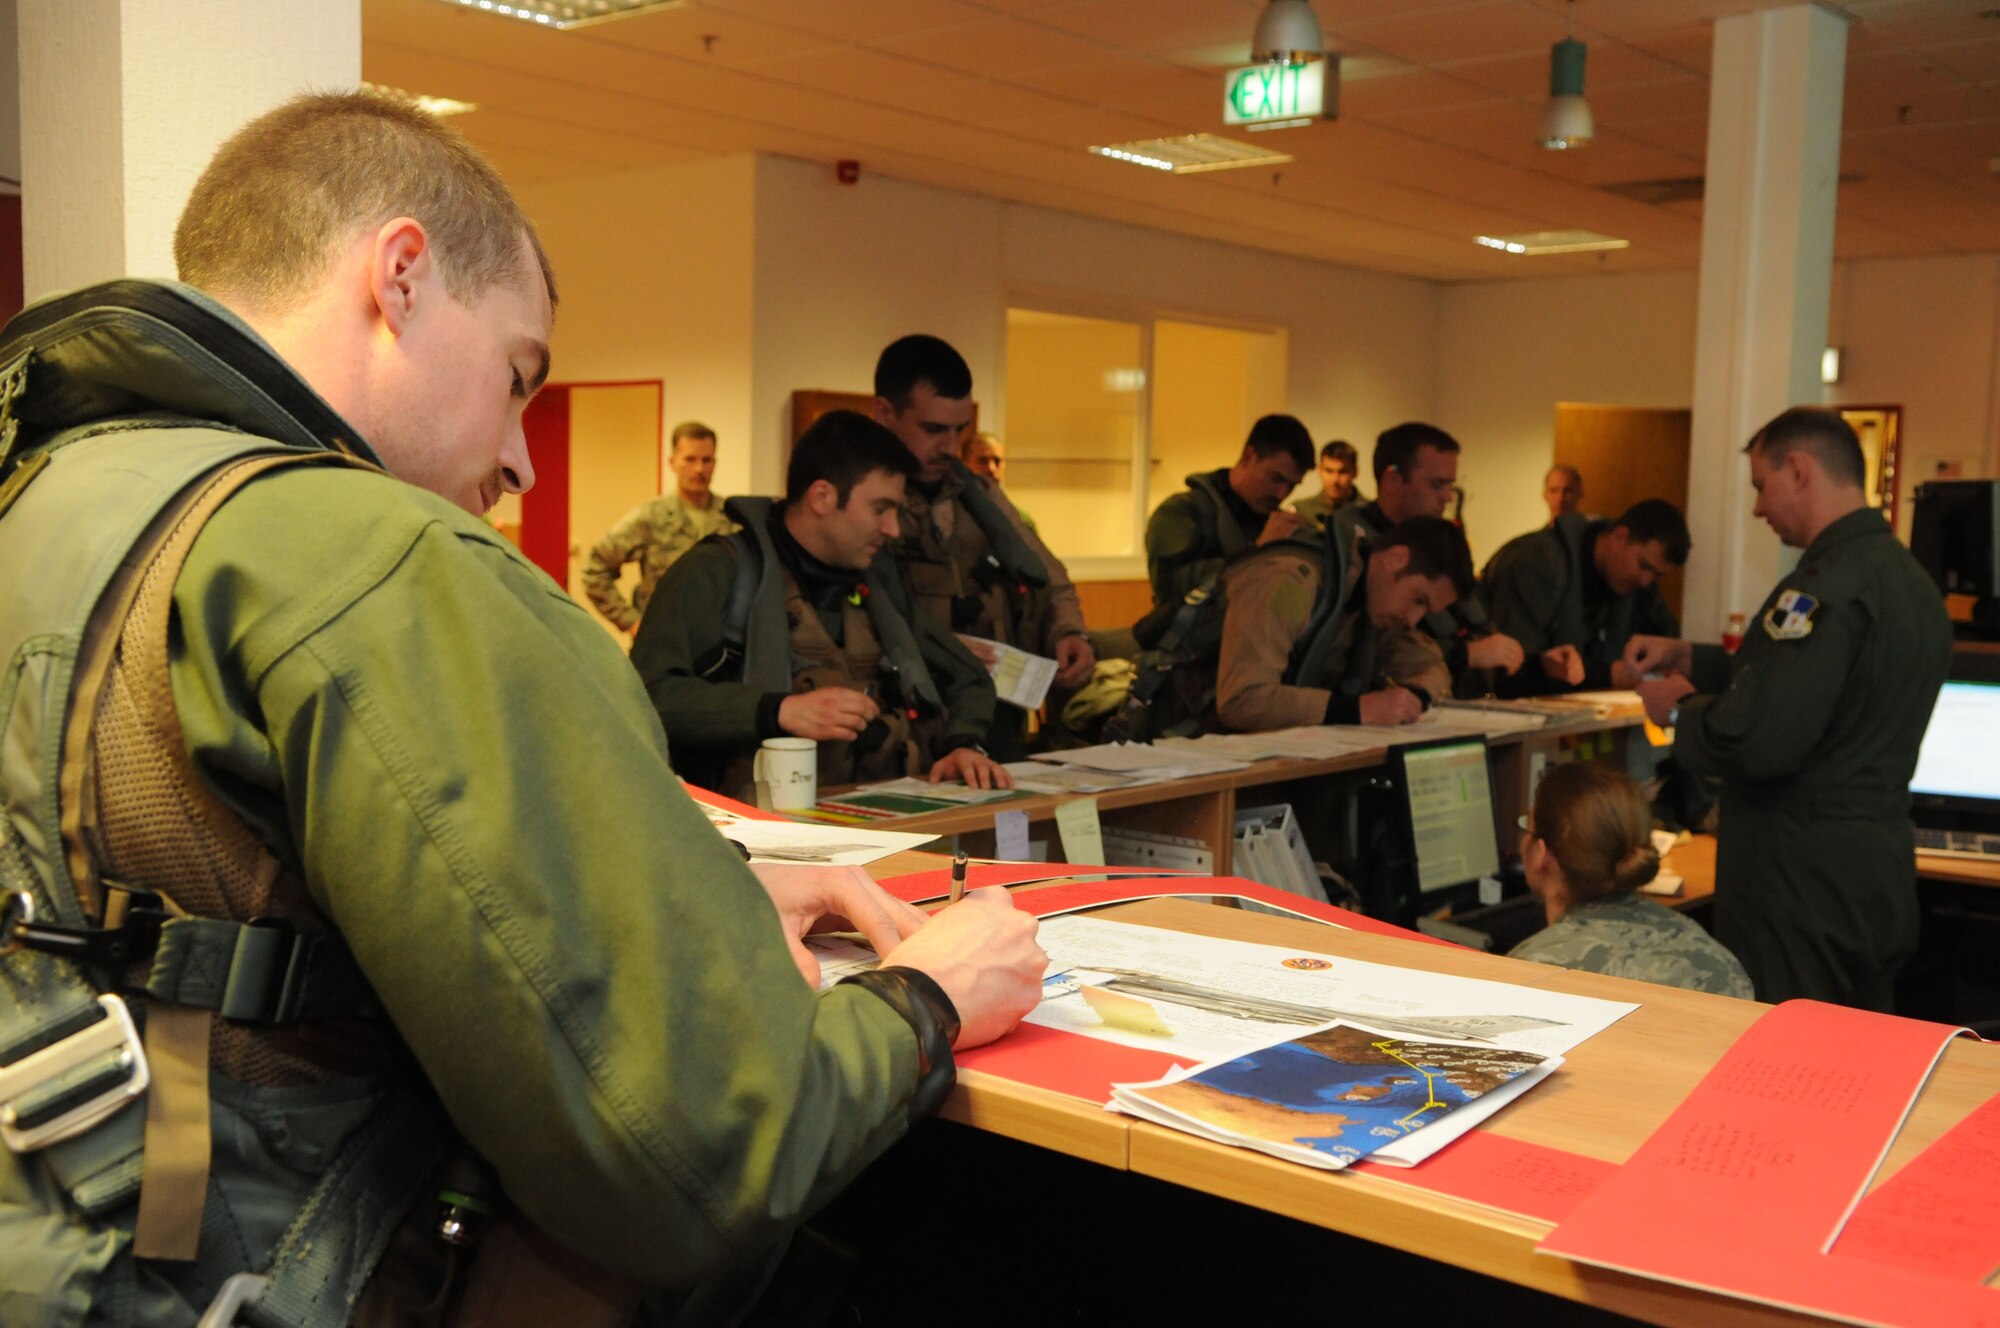 SPANGDAHLEM AIR BASE, Germany – Pilots from the 480th Fighter Squadron receive a briefing at the squadron here before leaving to support of Operation Odyssey Dawn March 19. Joint Task Force Odyssey Dawn is the U.S. Africa Command task force established to provide operational and tactical command and control of U.S. military forces supporting the international response to the unrest in Libya and enforcement of United Nations Security Council Resolution (UNSCR) 1973. UNSCR 1973 authorizes all necessary measures to protect civilians in Libya under threat of attack by Qadhafi regime forces.  JTF Odyssey Dawn is commanded by U.S. Navy Admiral Samuel J. Locklear, III. (U.S. Air Force photo/Staff Sgt. Benjamin Wilson)